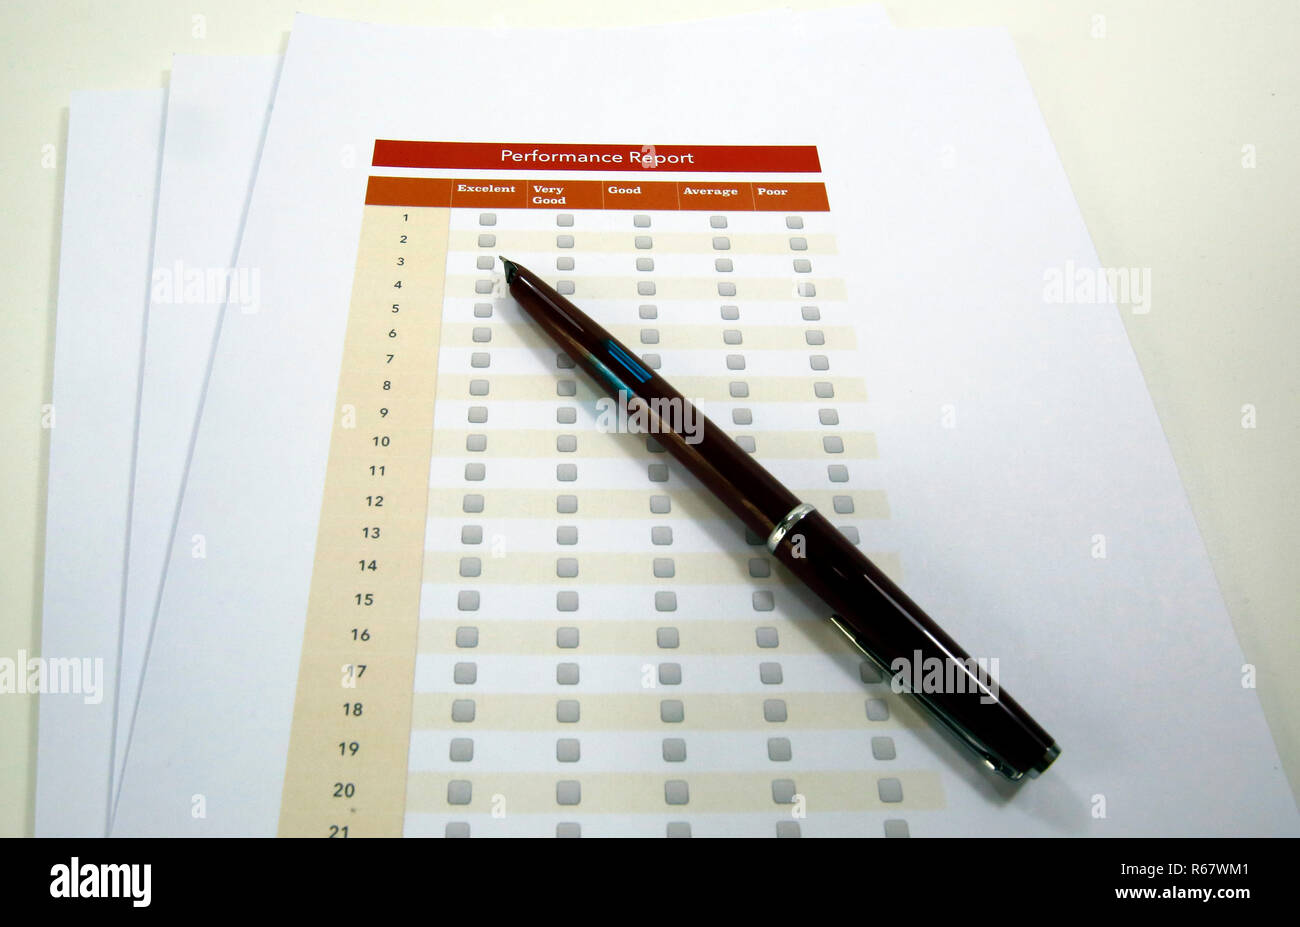 Sales agreement and check list Stock Photo